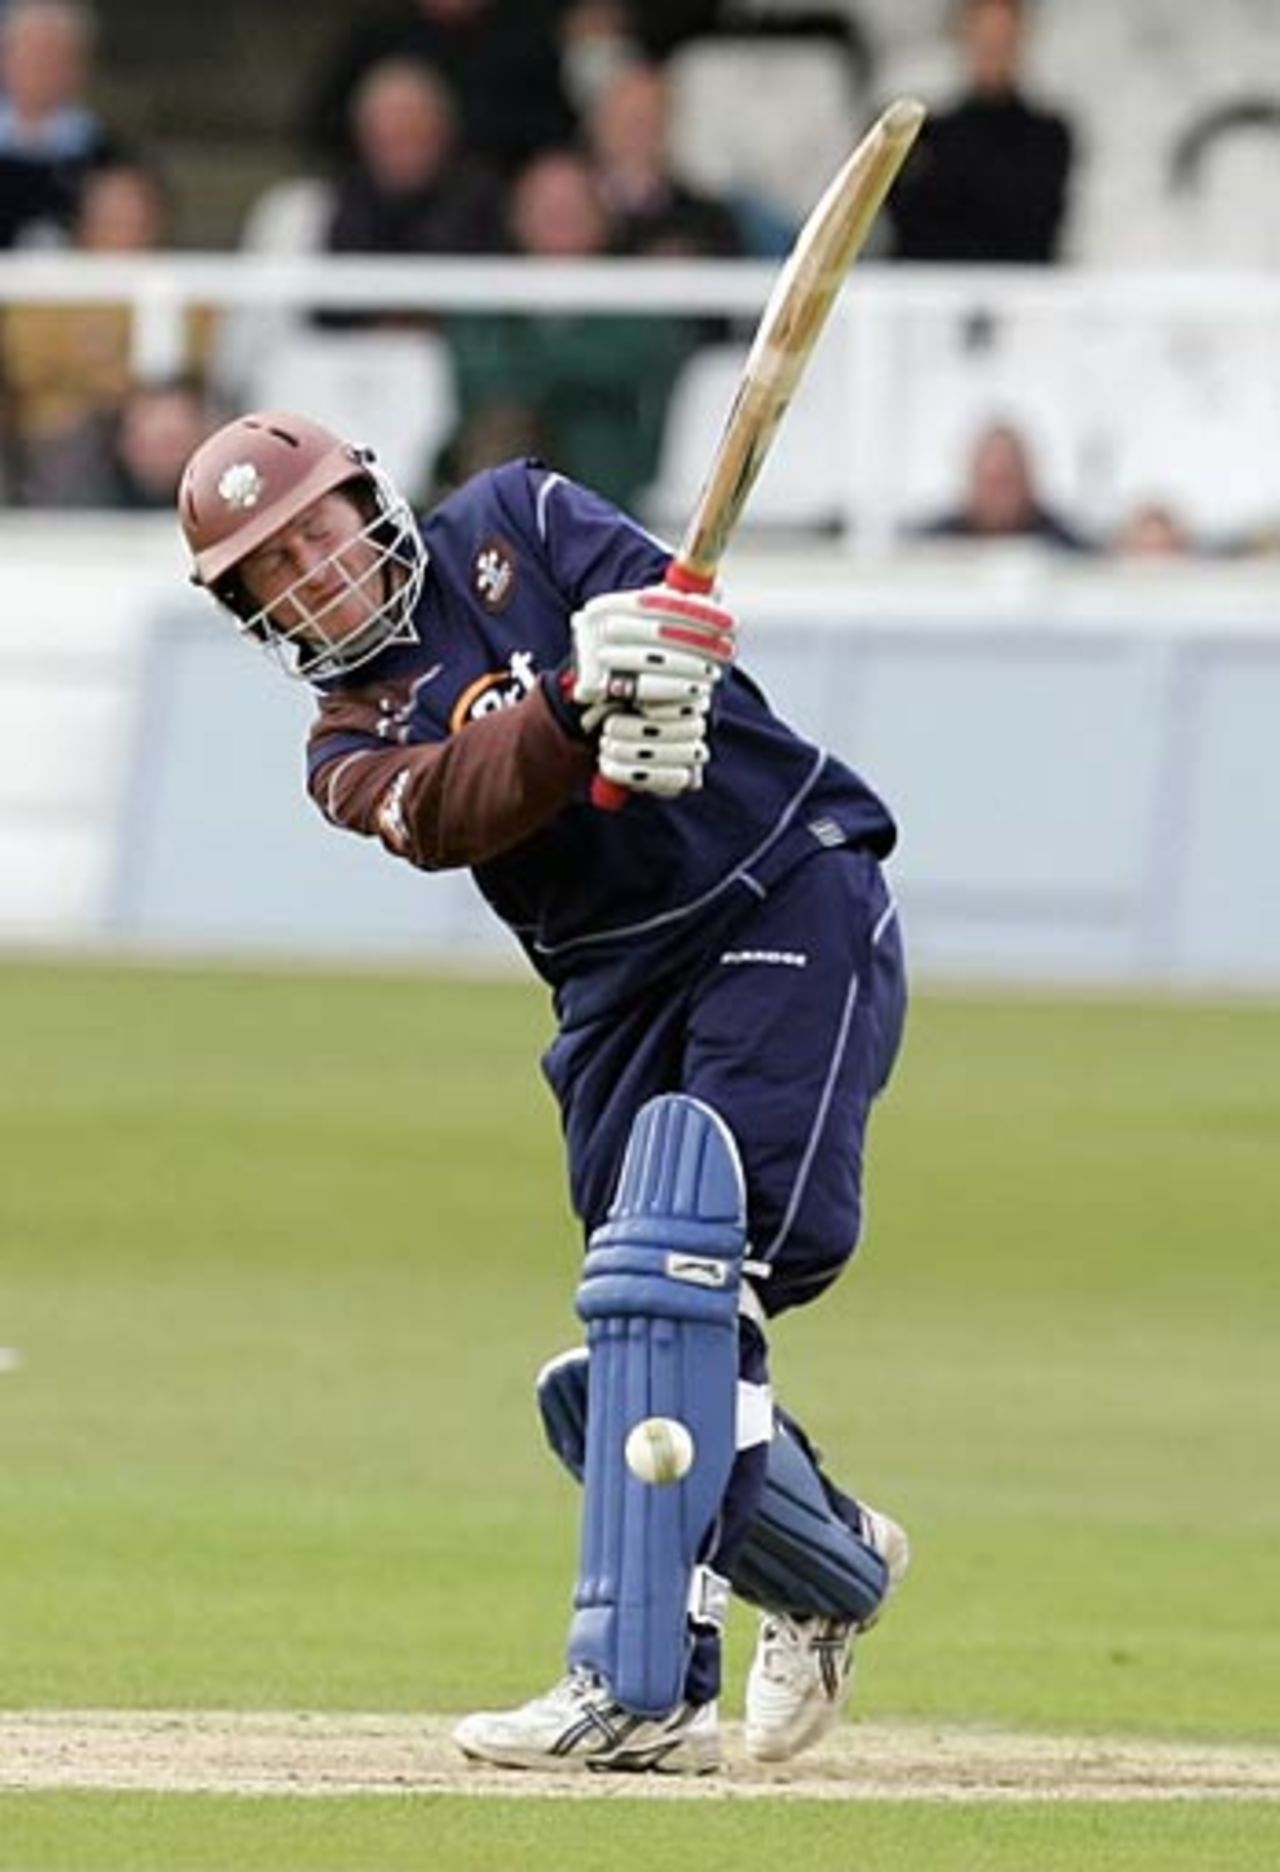 Ali Brown has a typical swing during his 64 off 43 balls in the rain-shortened game at Hove, Kent v Surrey, C&G Trophy, Canterbury, May 1, 2006